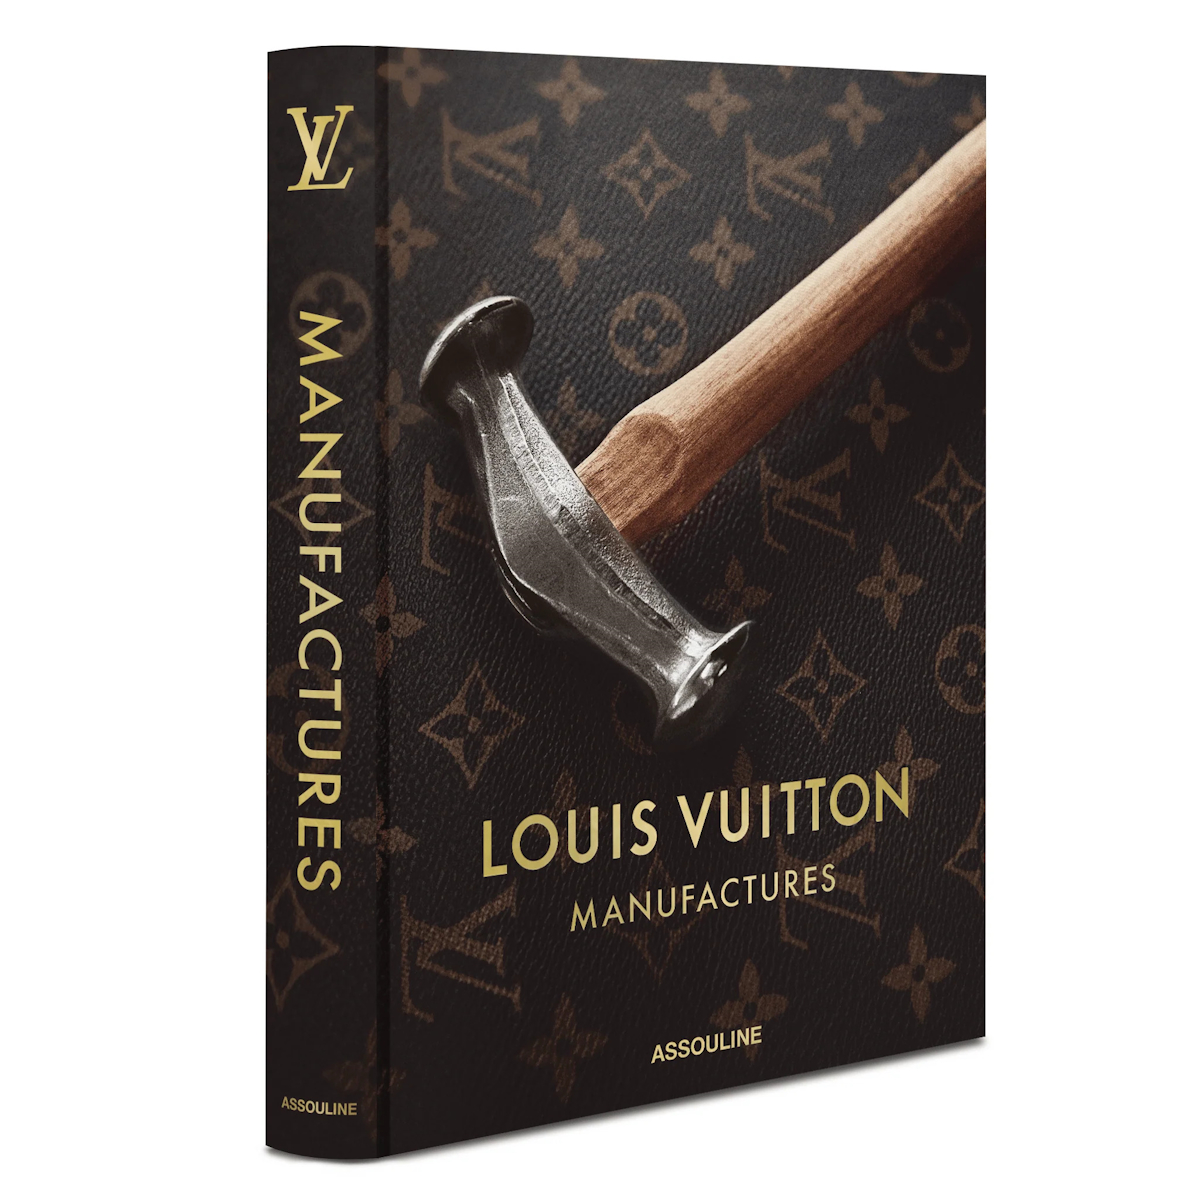 Here's 8 Assouline Fashion Books To Gift Any Fashion Fanatic This Holiday Season...